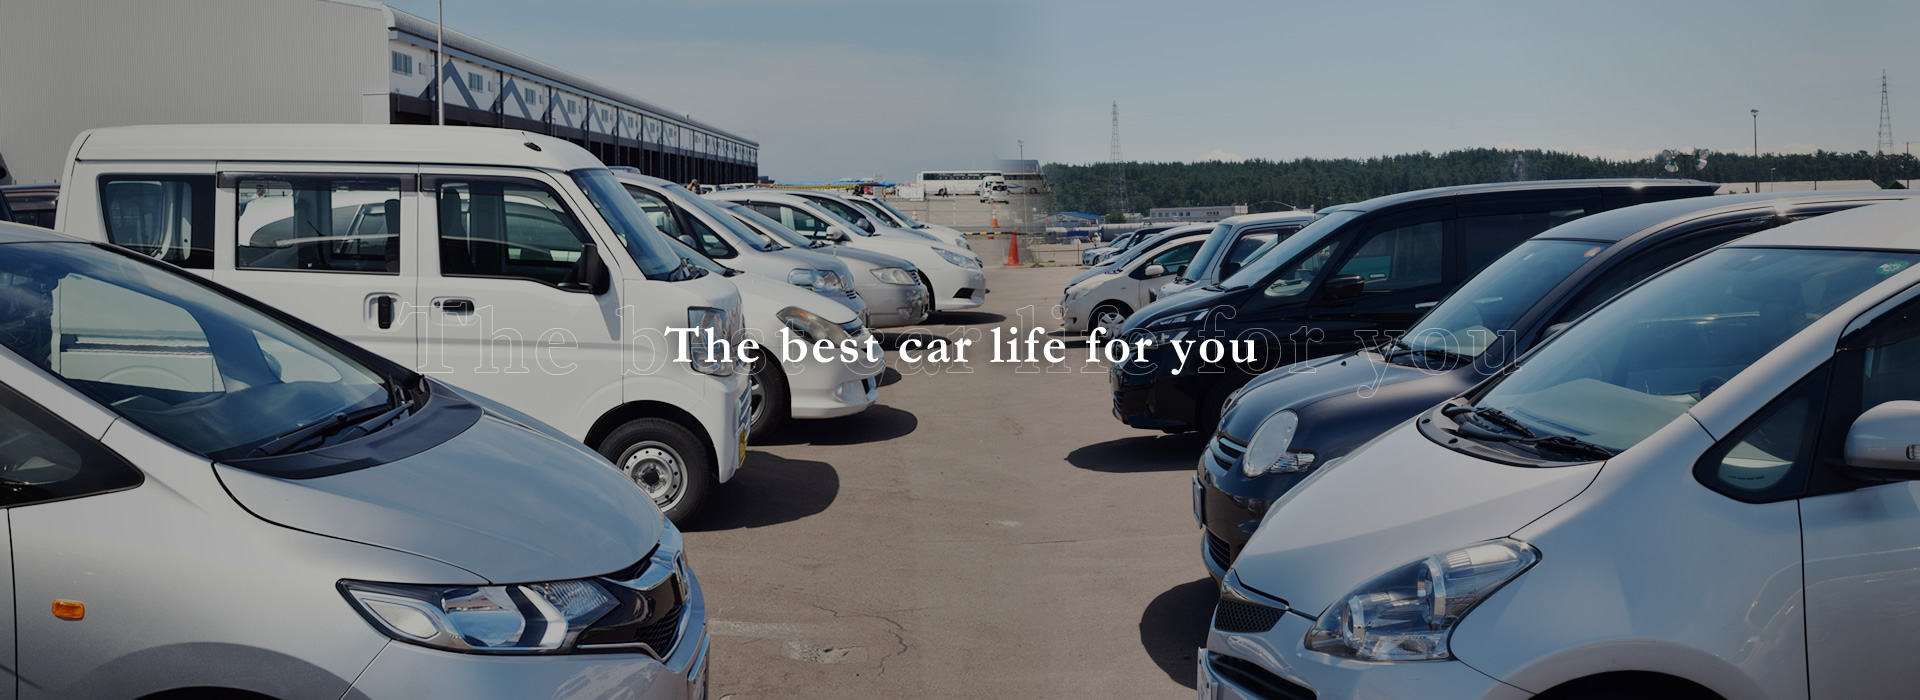 The best car life for you